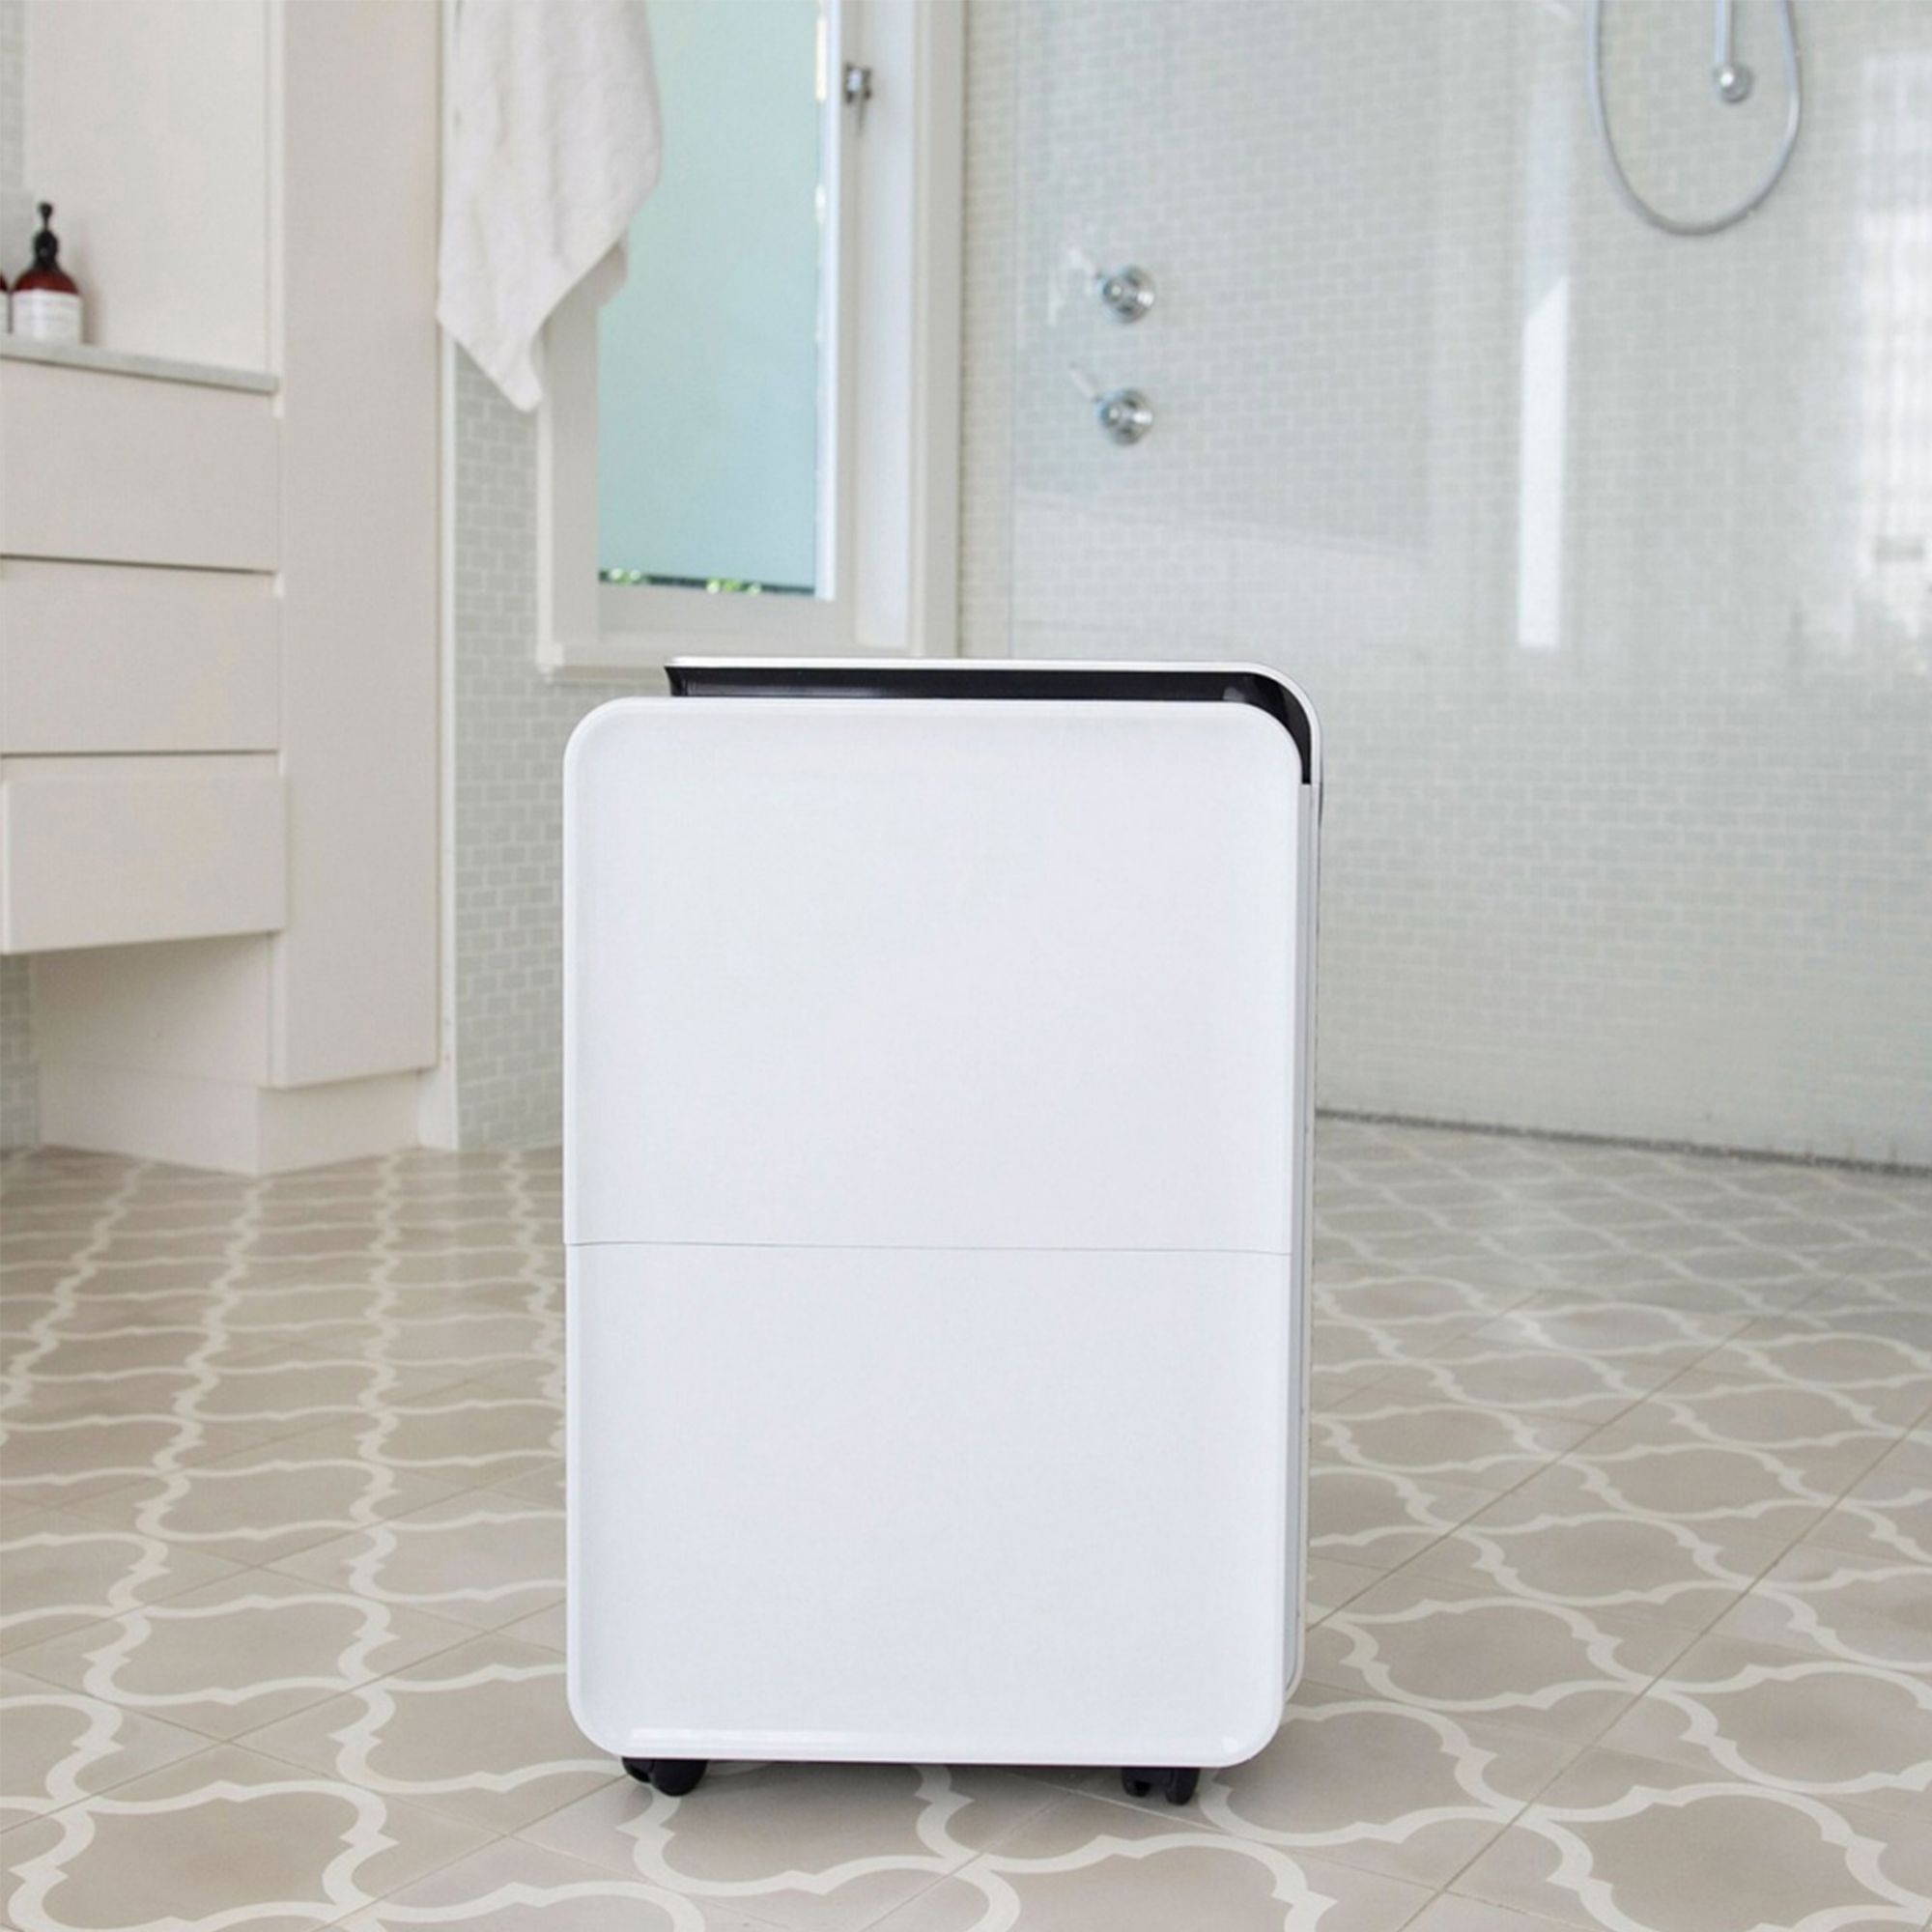 Breville The Smart Dry Ultimate Dehumidifier Image 2